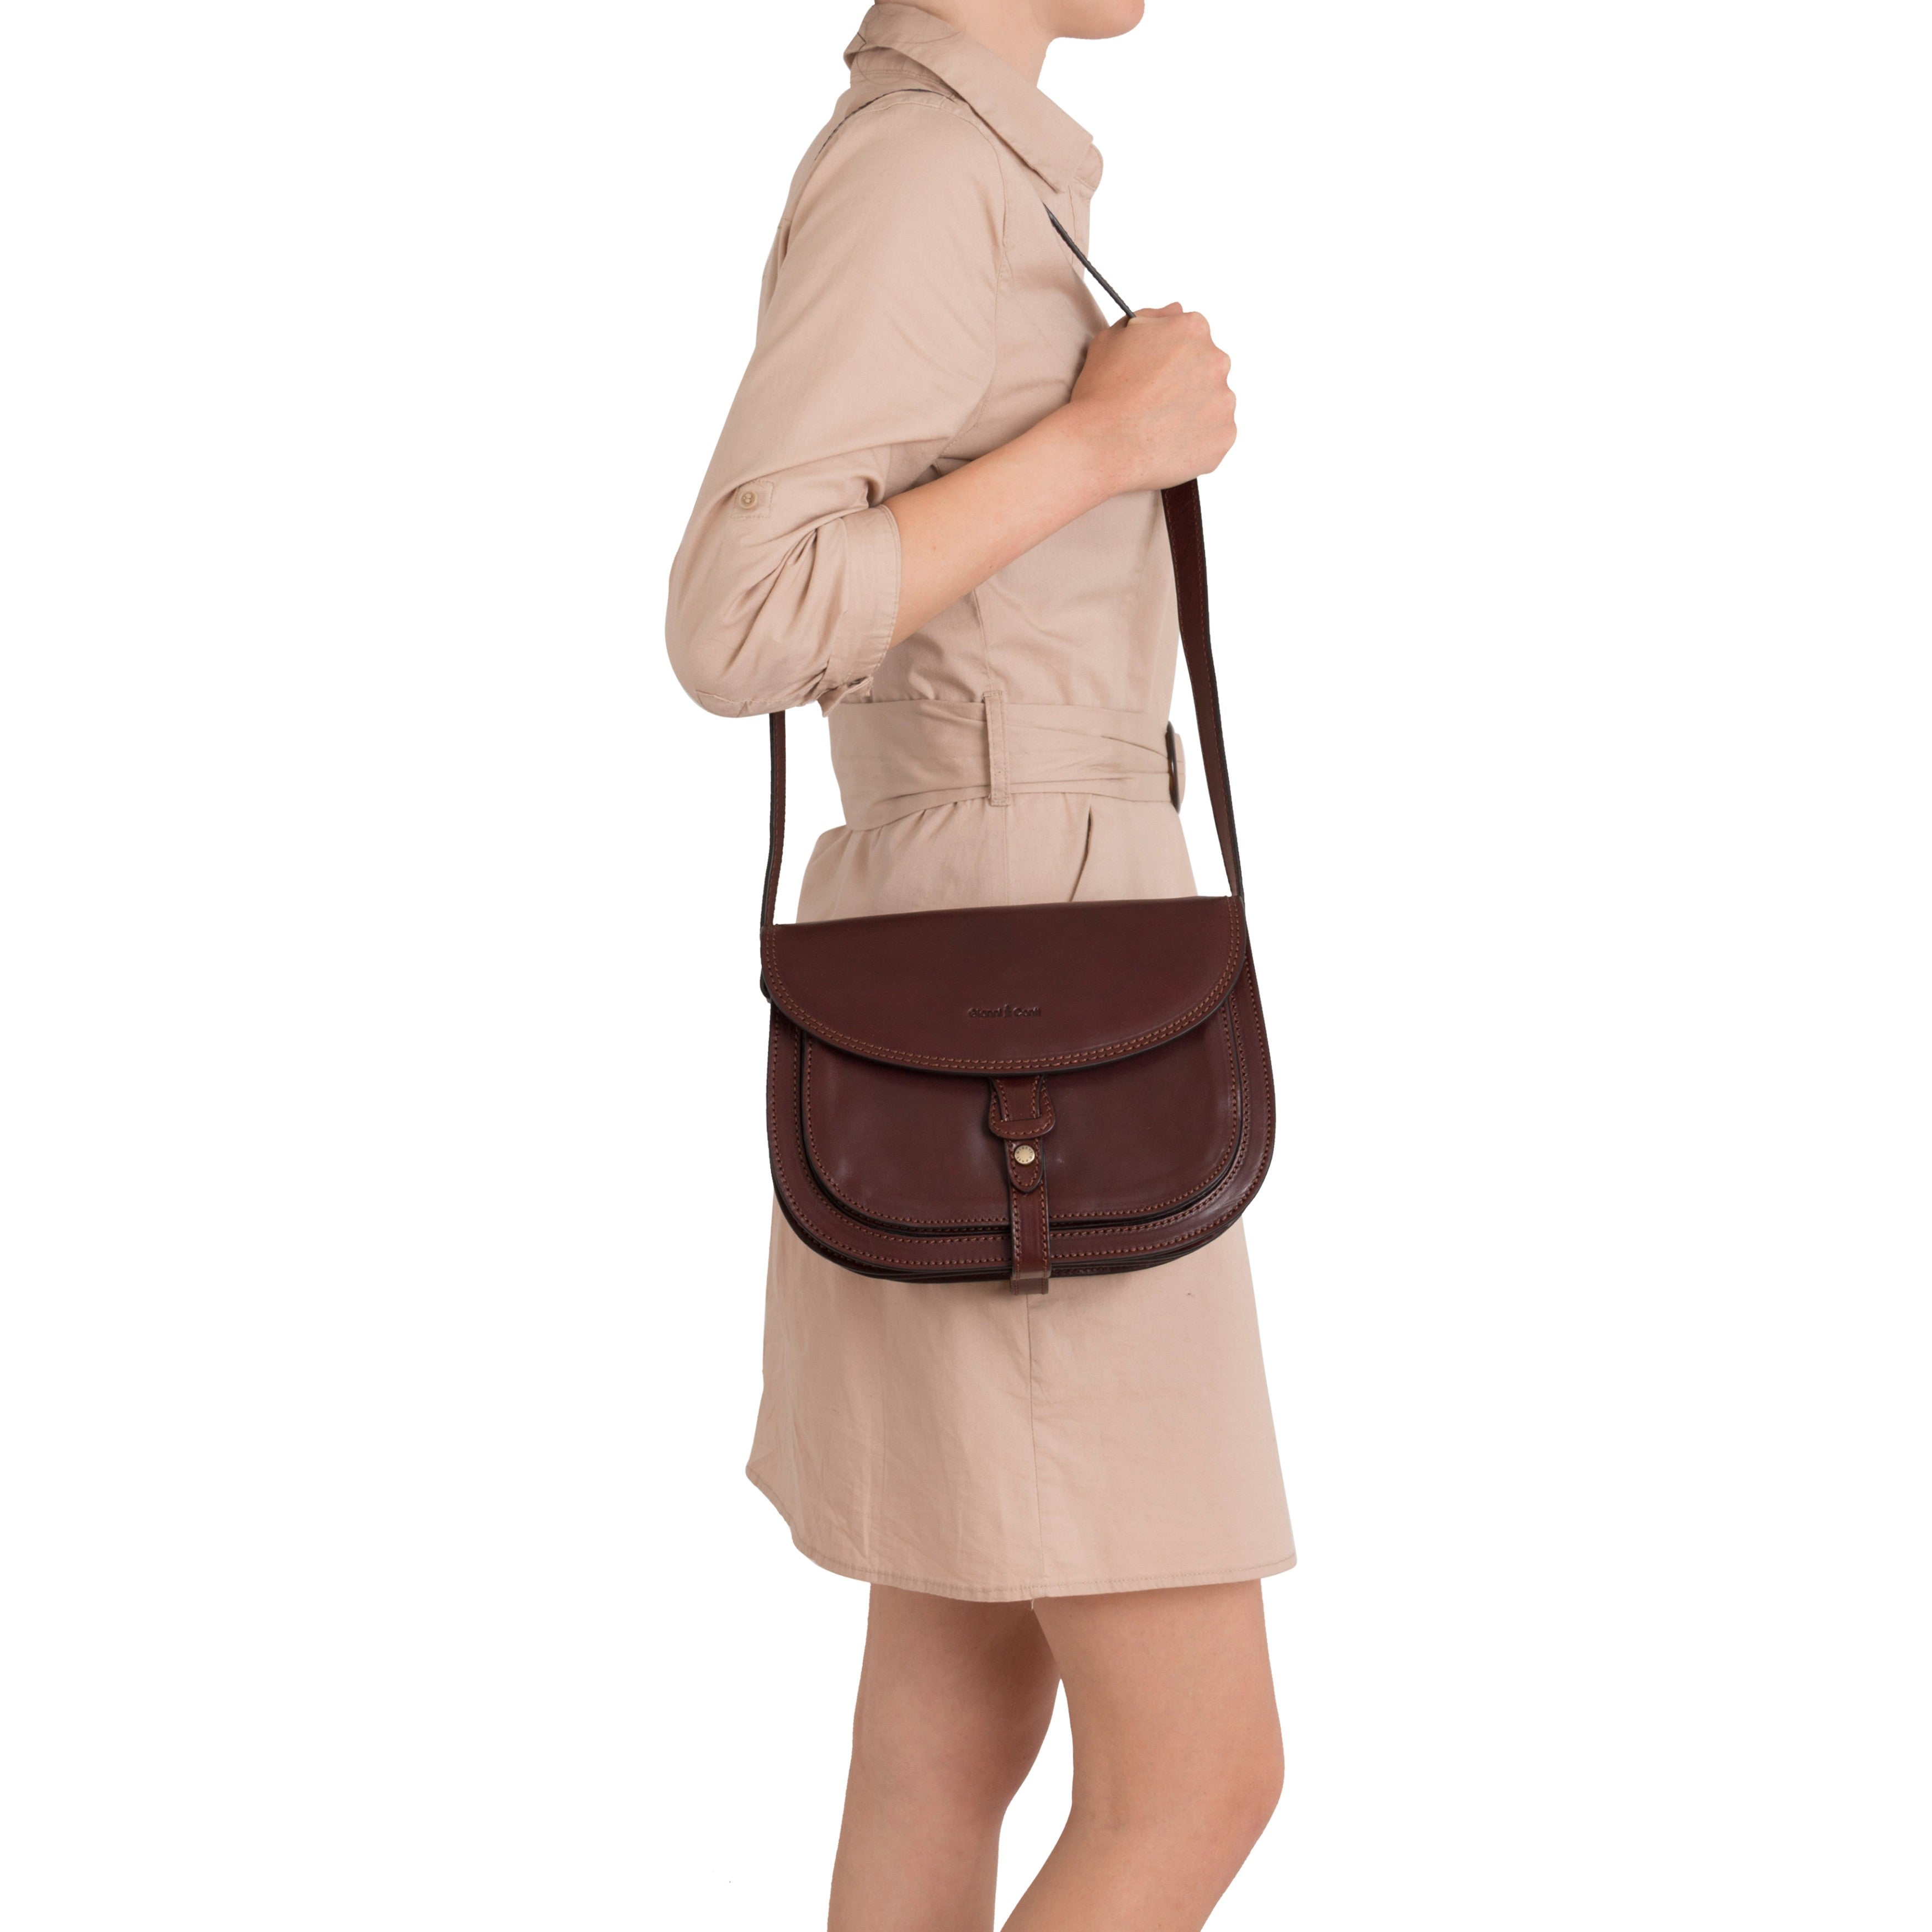 Gianni Conti Sybille Crossbody Bag - Vegetable-Tanned Leather